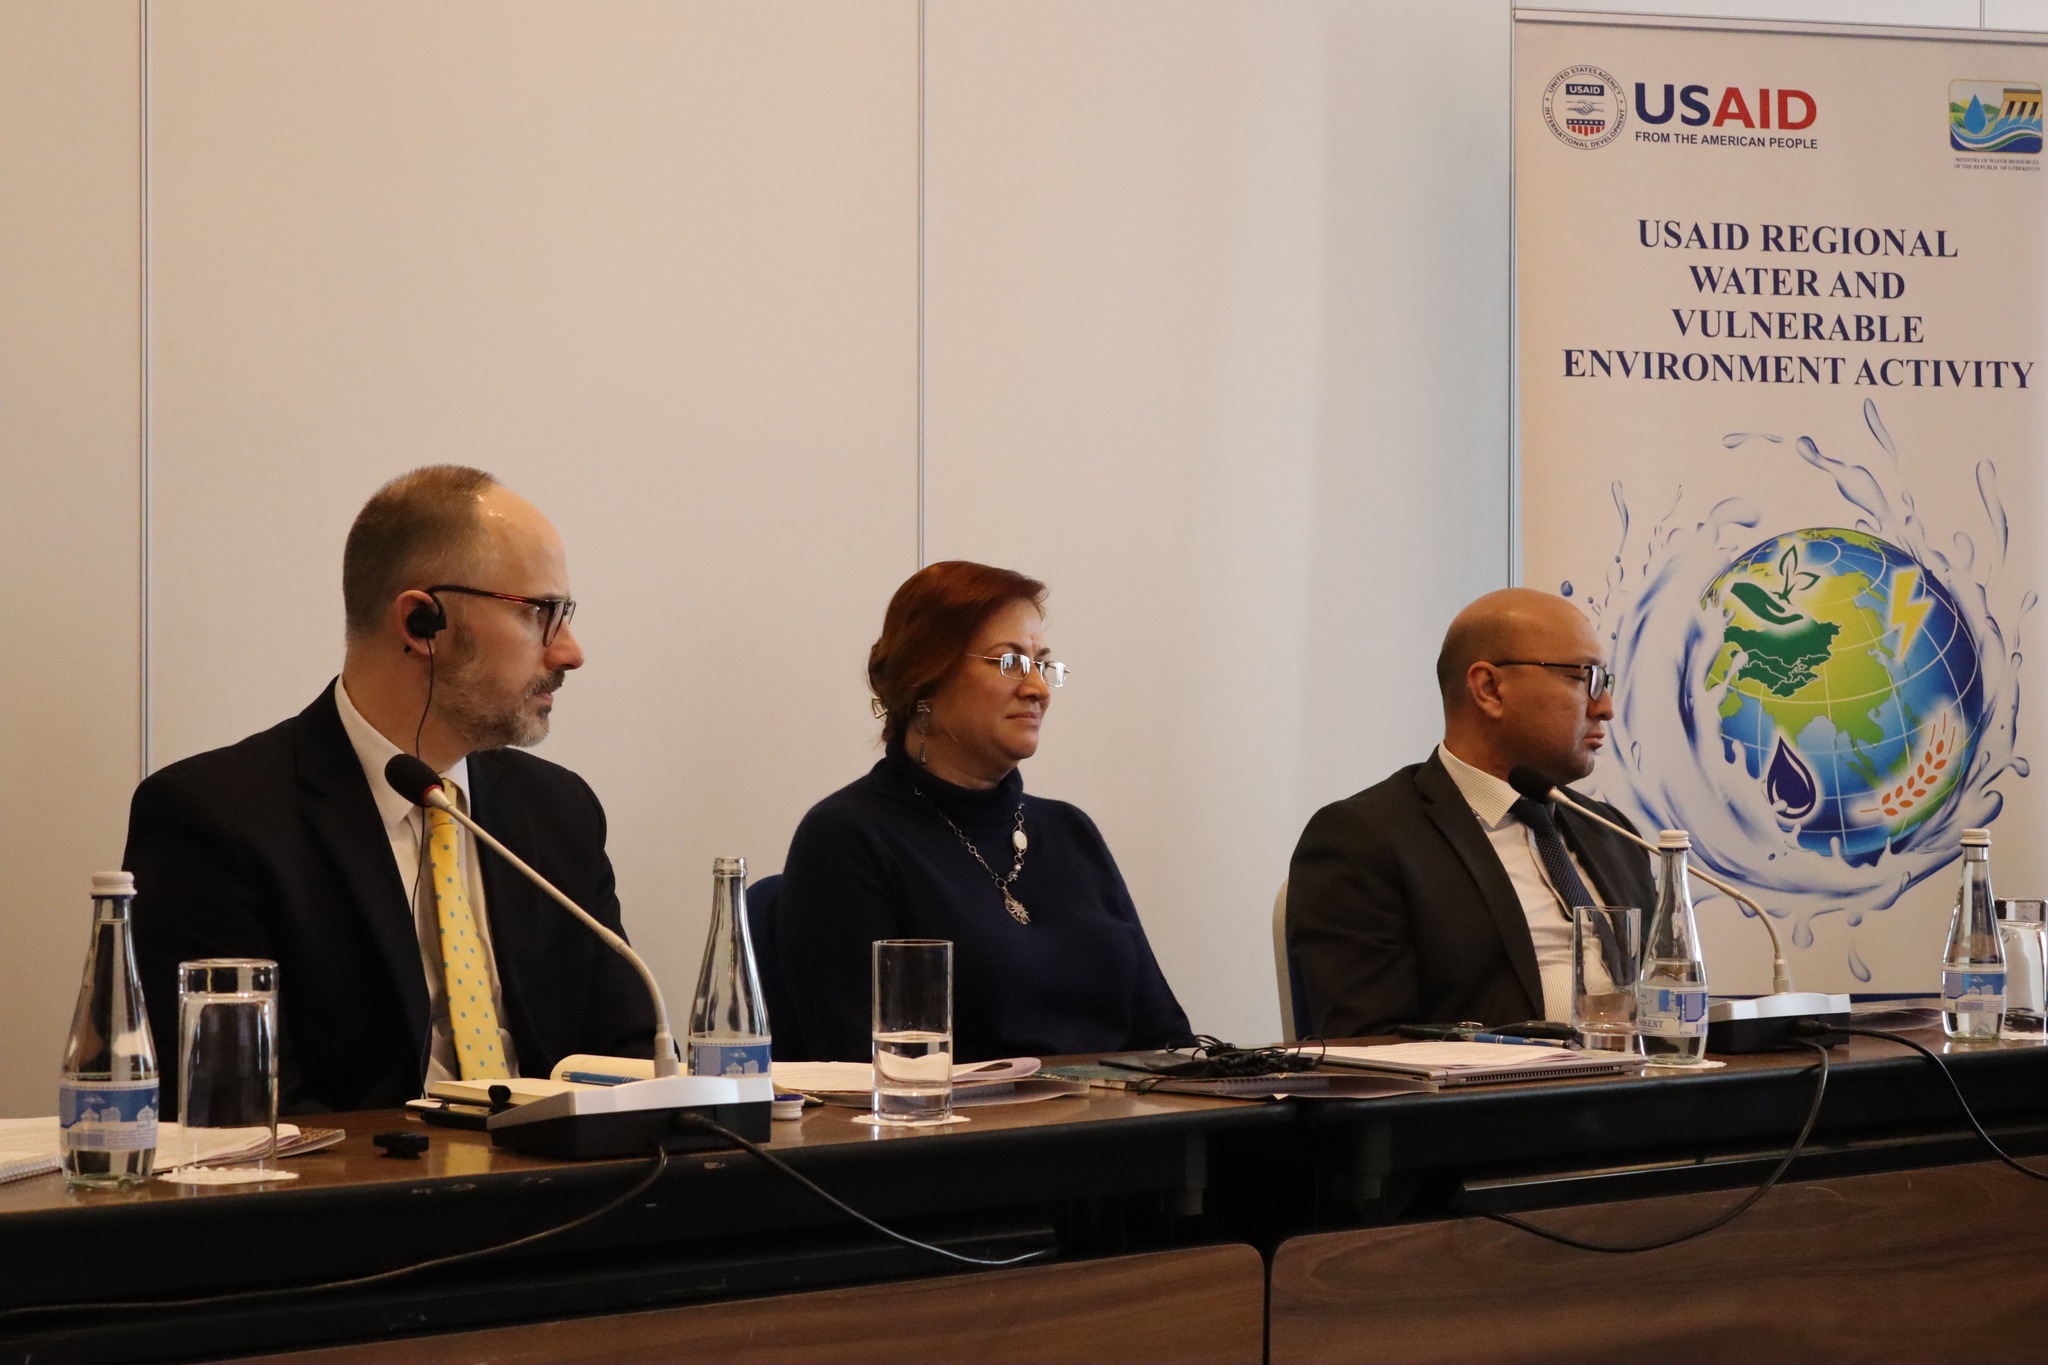 USAID organized the 6th National Intersectoral Committee (NIC) meeting in Uzbekistan in cooperation with the Ministry of Water Resources